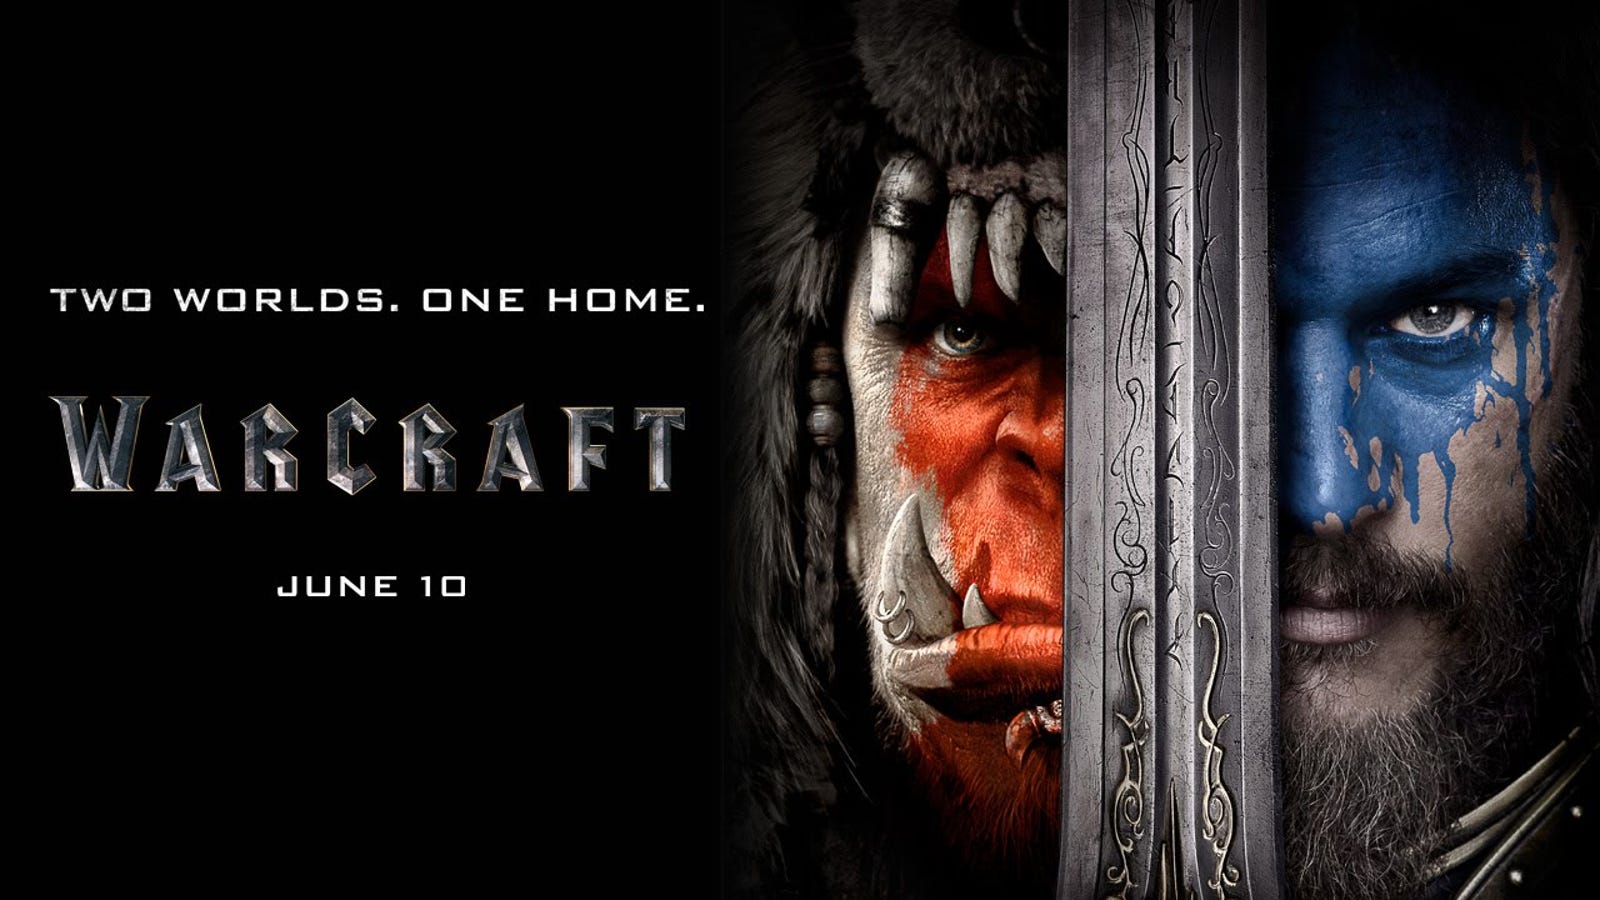 is there going to be a warcraft 2 movie